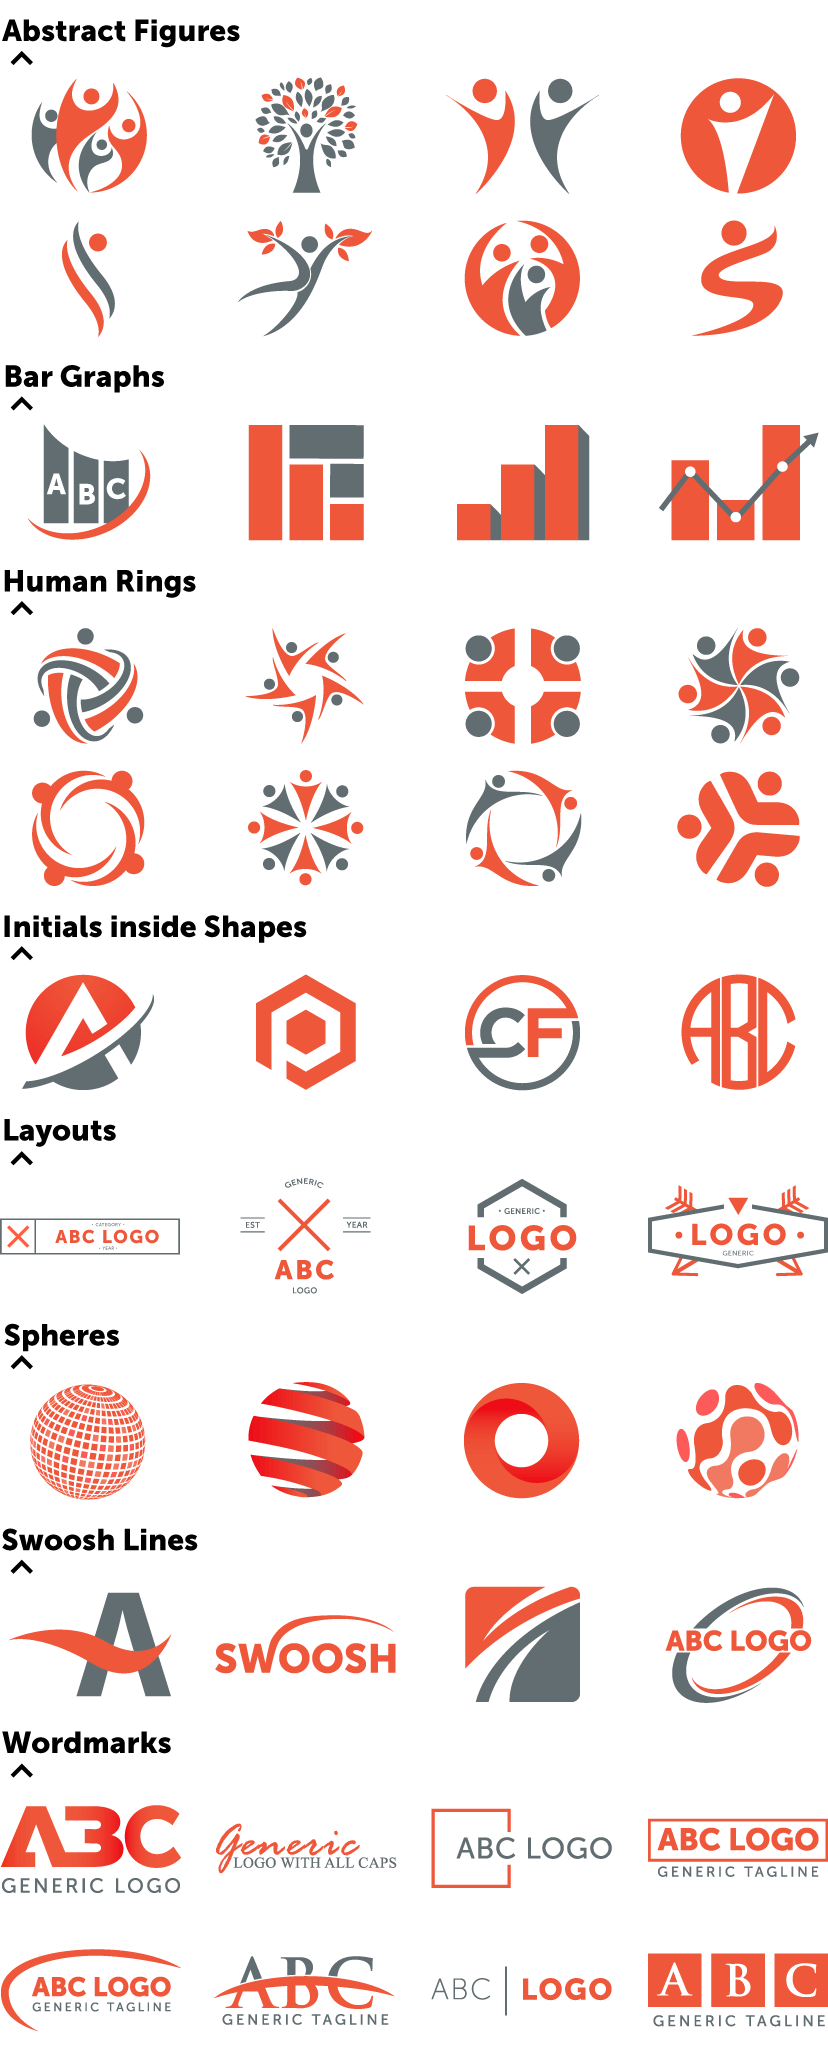 Generc Logo - Generic, common and overused logo concepts and how to avoid them ...